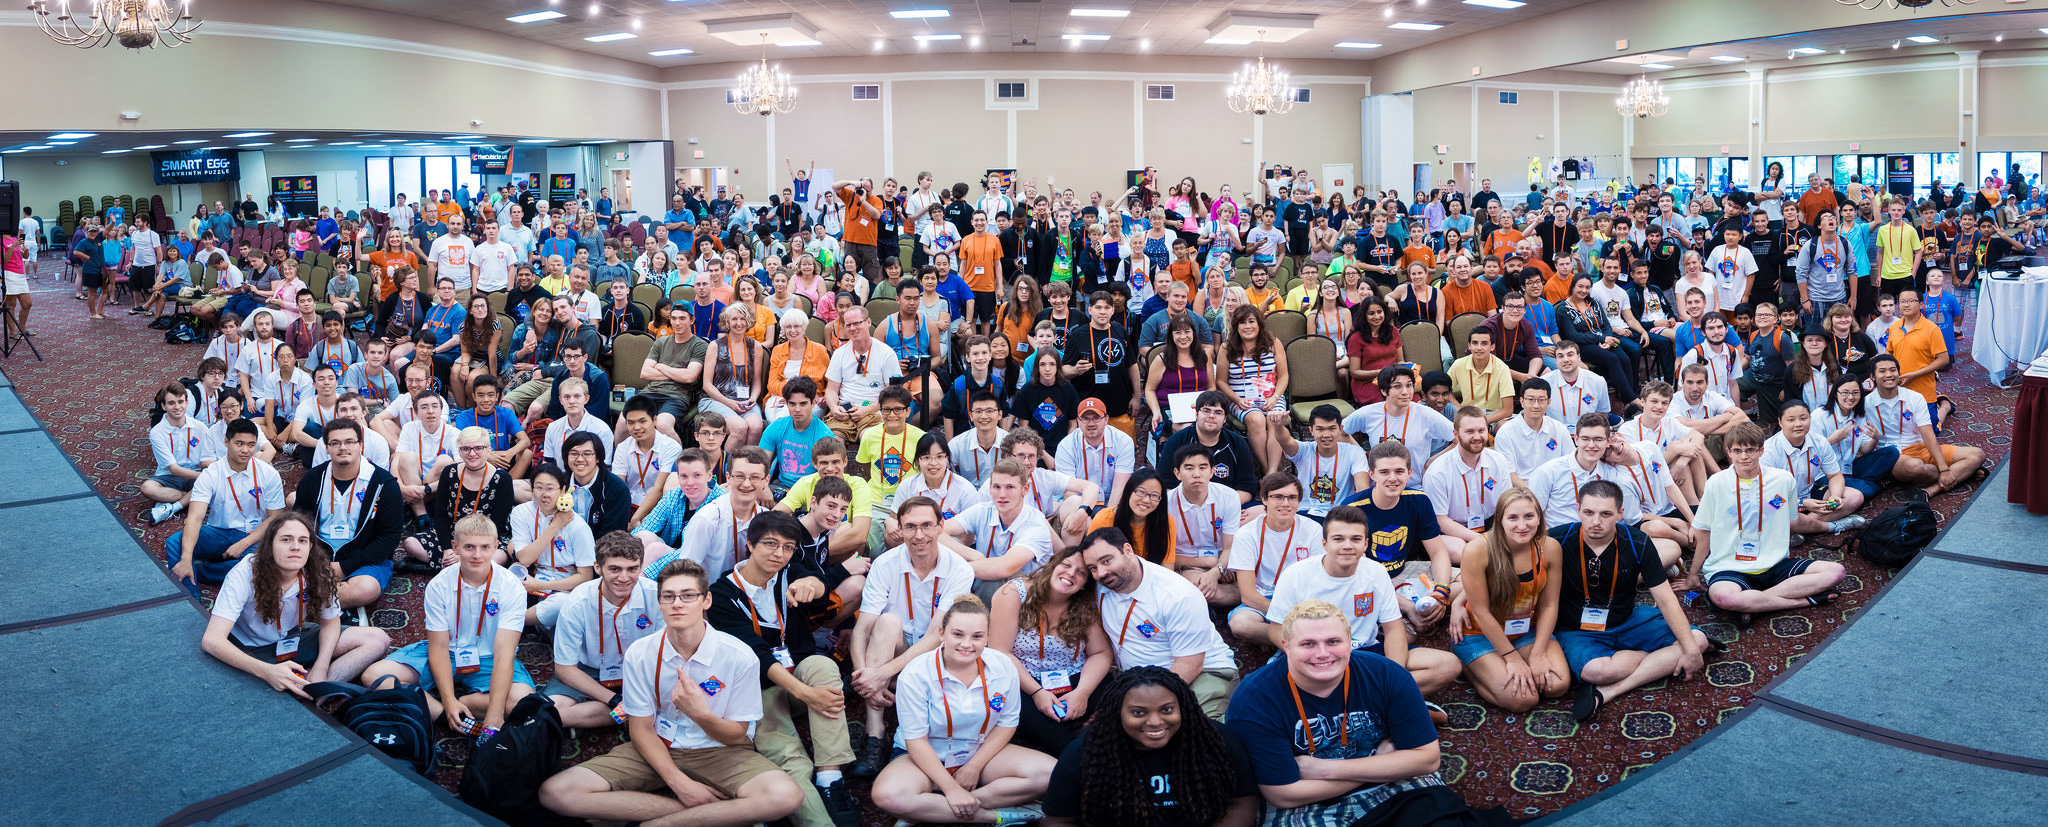 Competitors, spectators, and staff at Nationals 2015